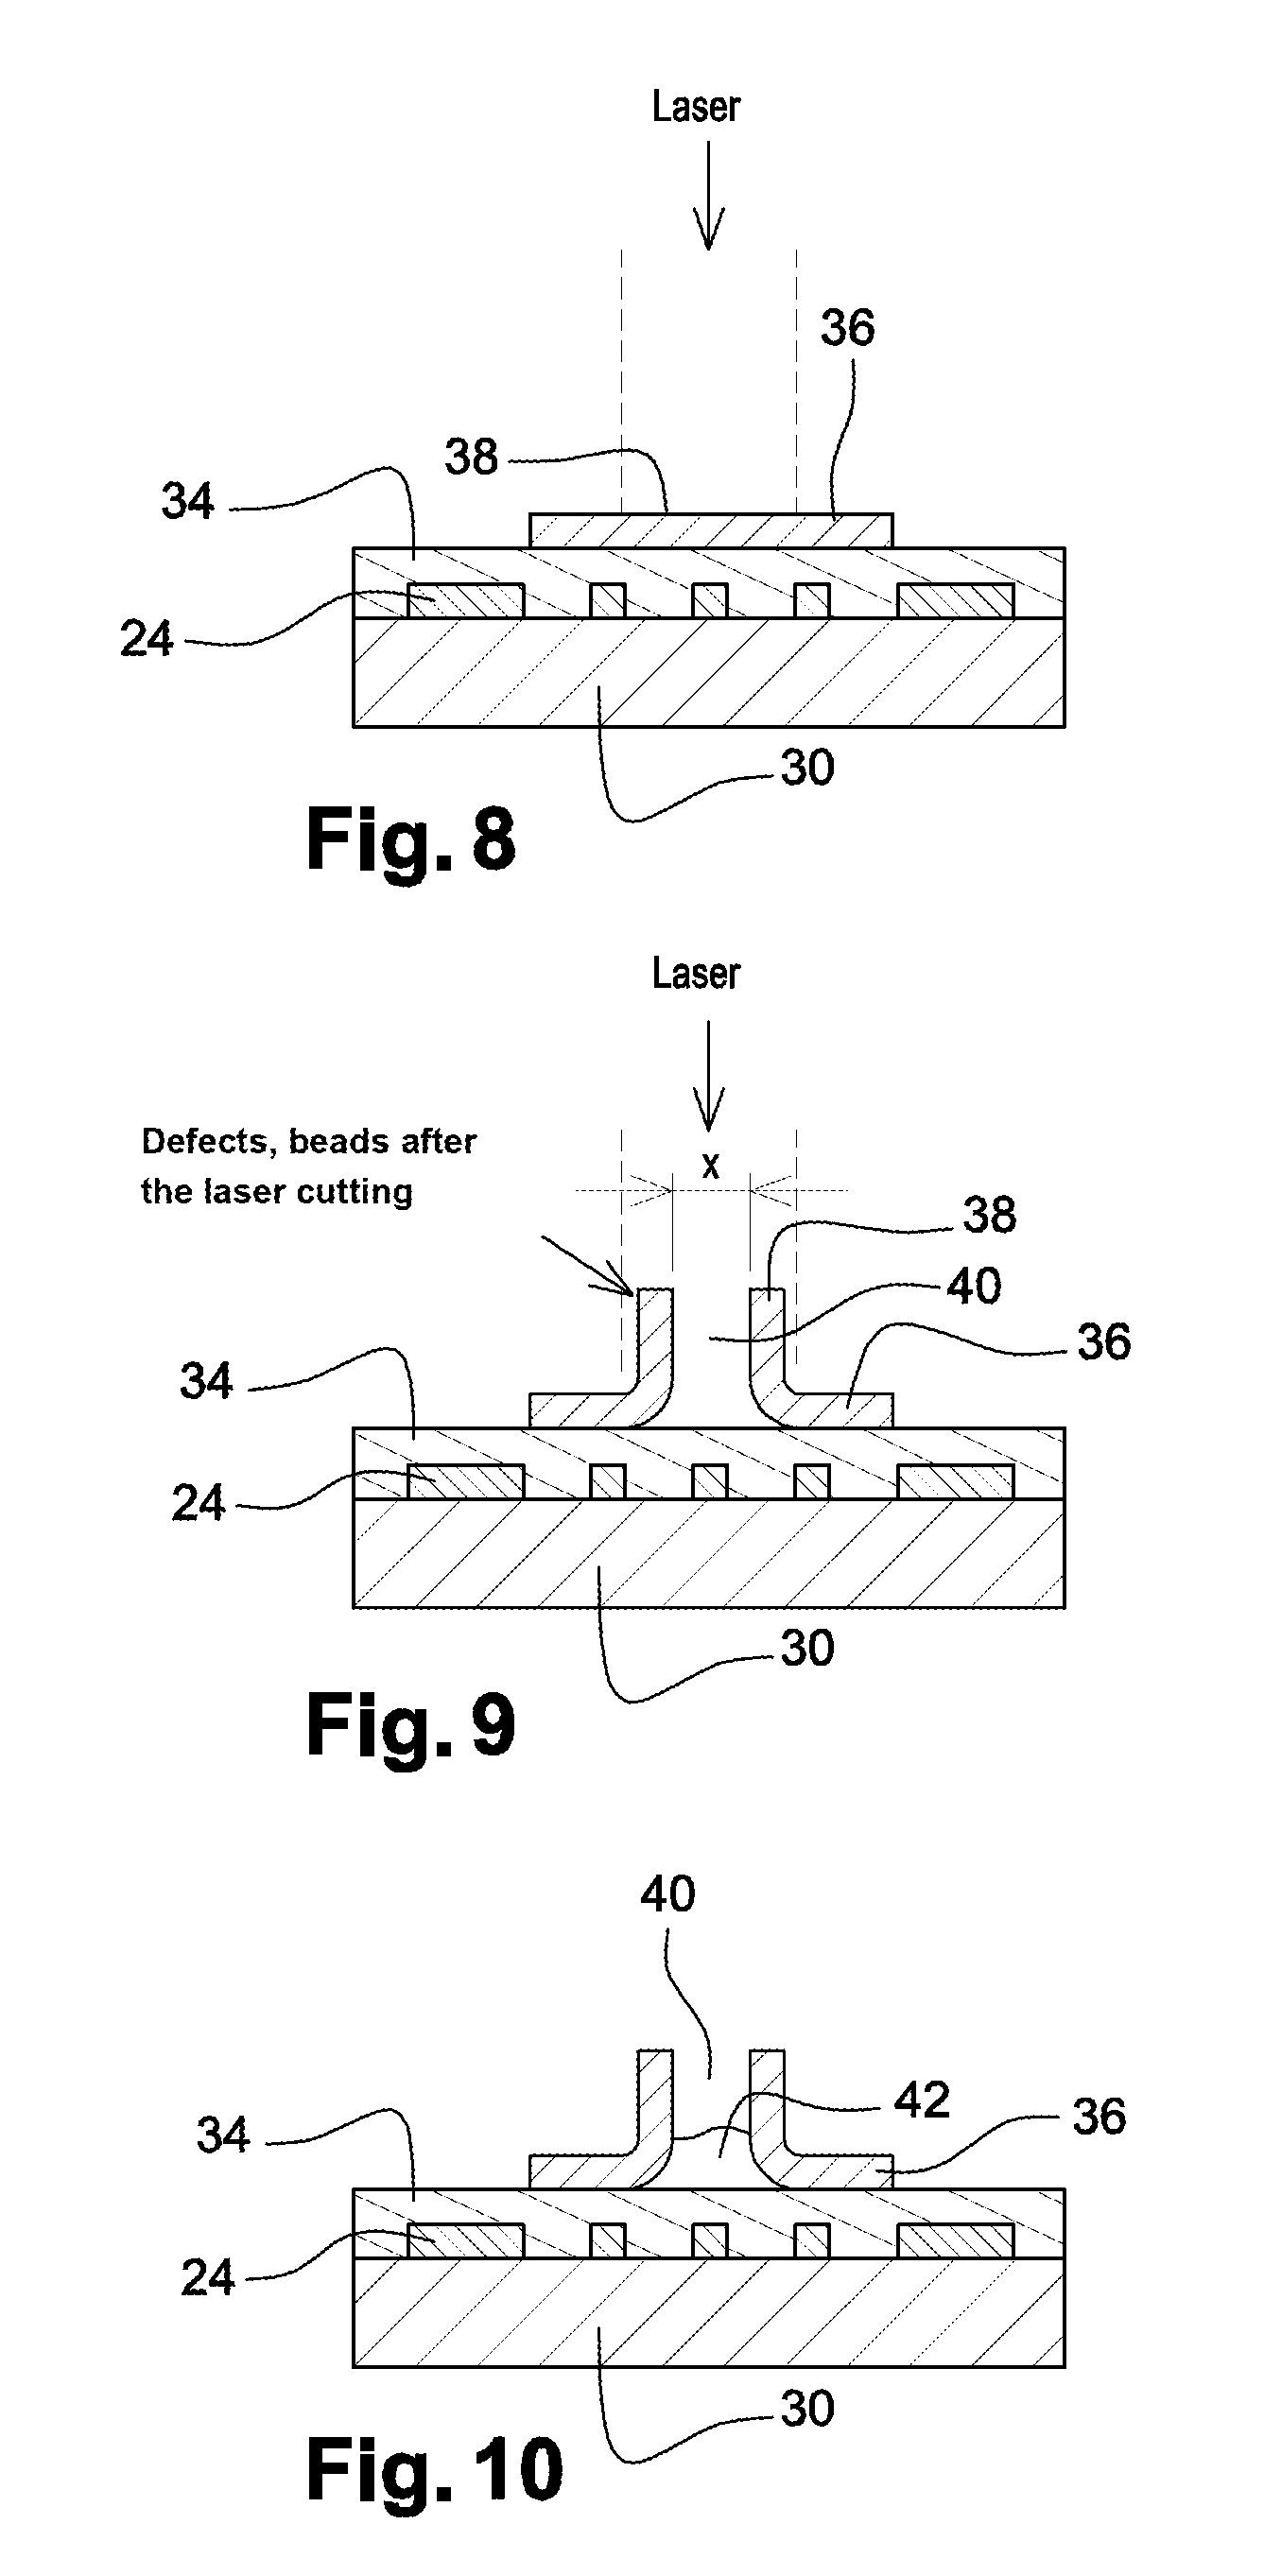 Flip-chip hybridization of microelectronic components by local heating of connecting elements